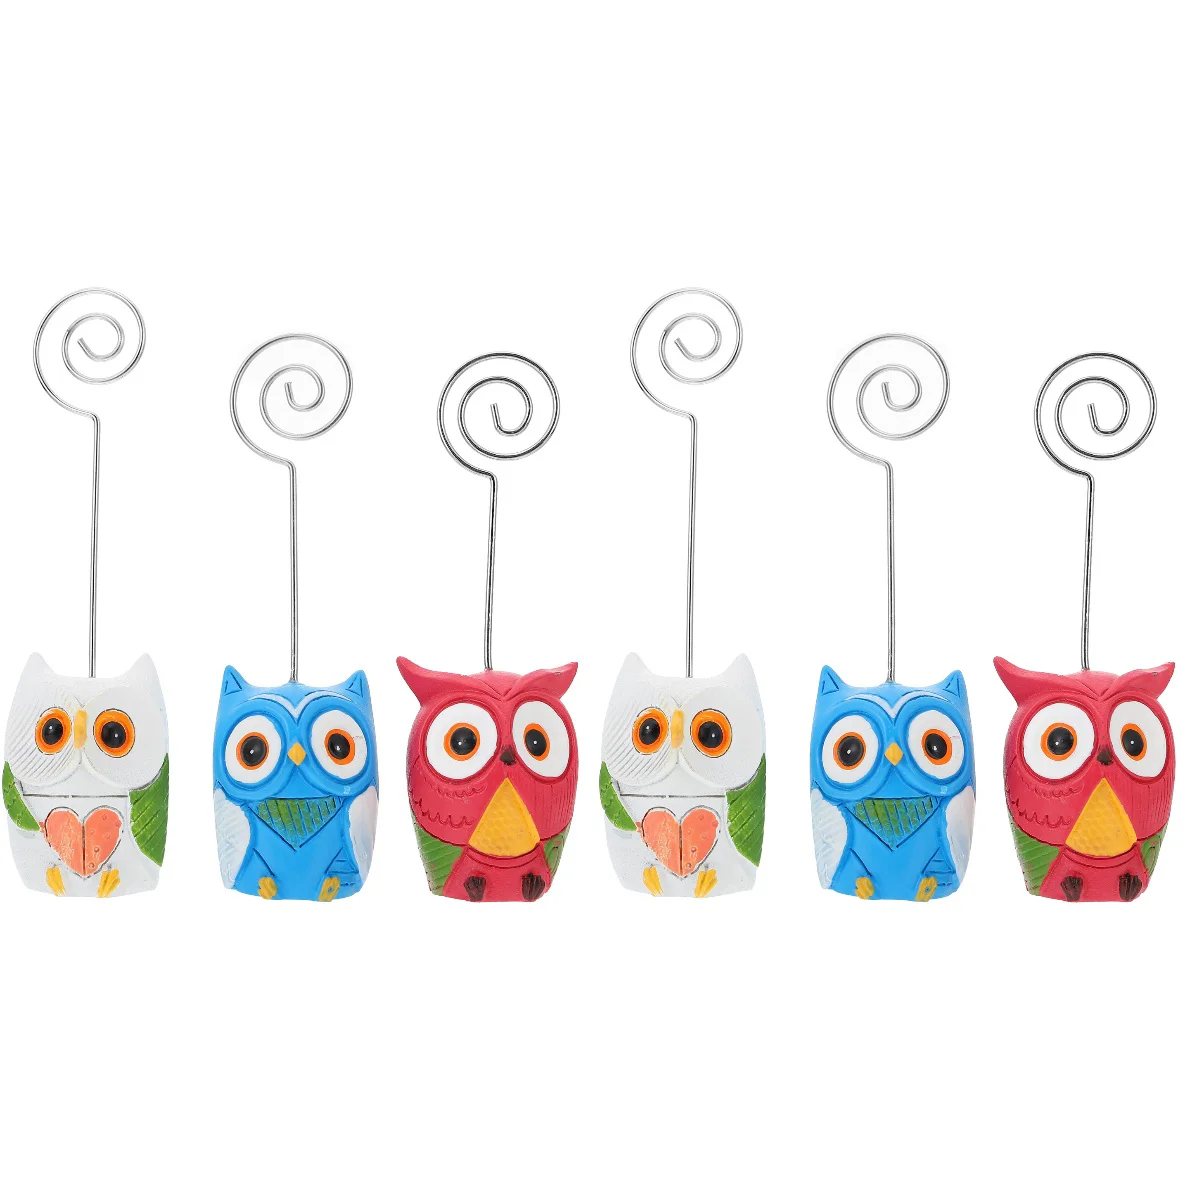 

Table Holder Holders Clip Memo Photo Place Sign Number Wood Clips Menu Wire Stands Picture Swirl Pictures Owl Name Stand Desktop